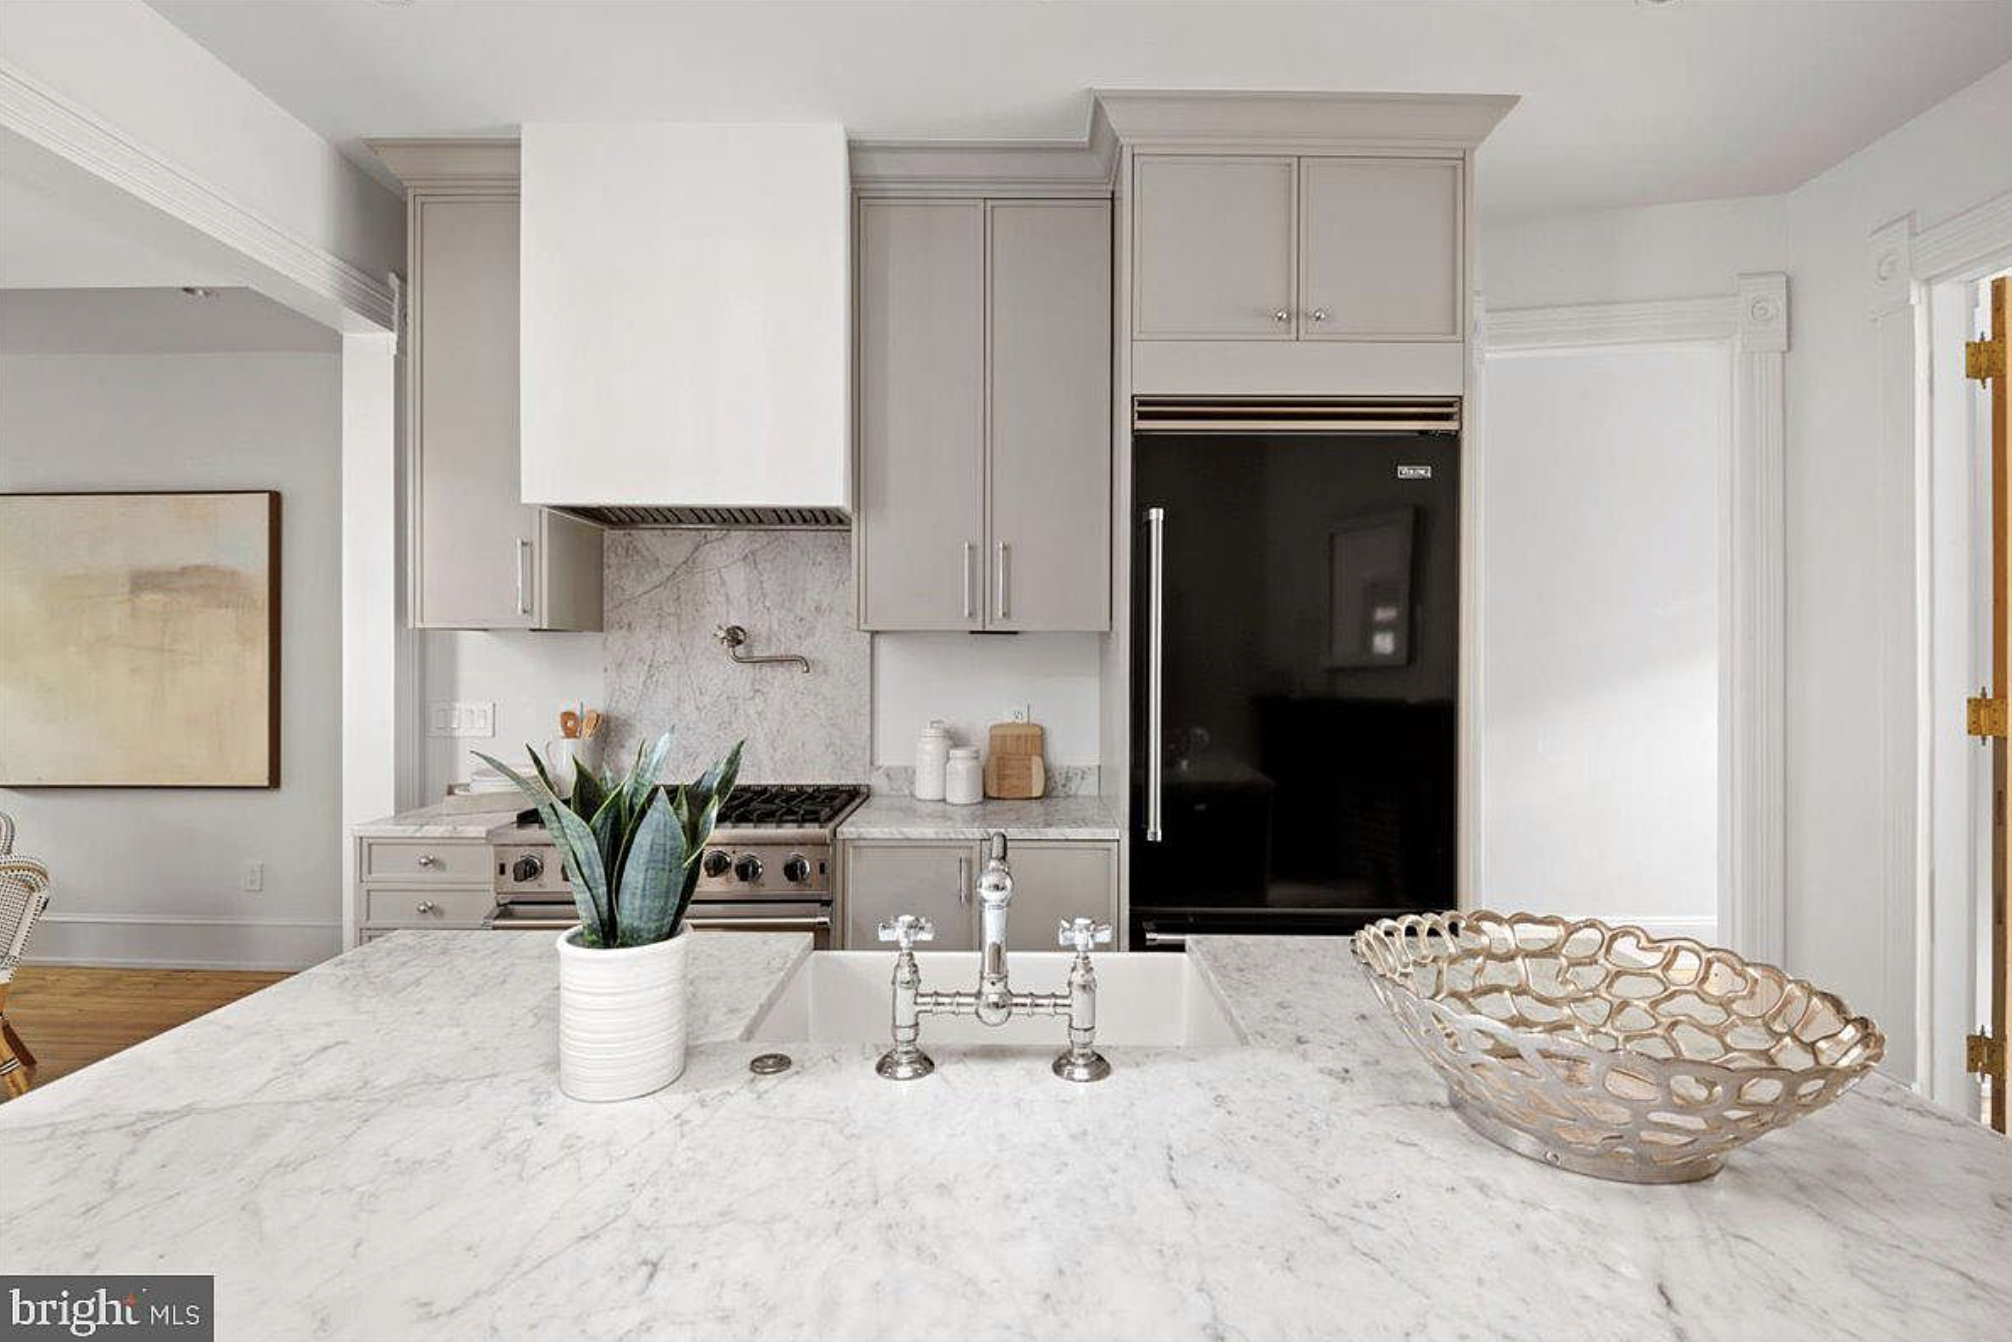 A kitchen with marble countertops.